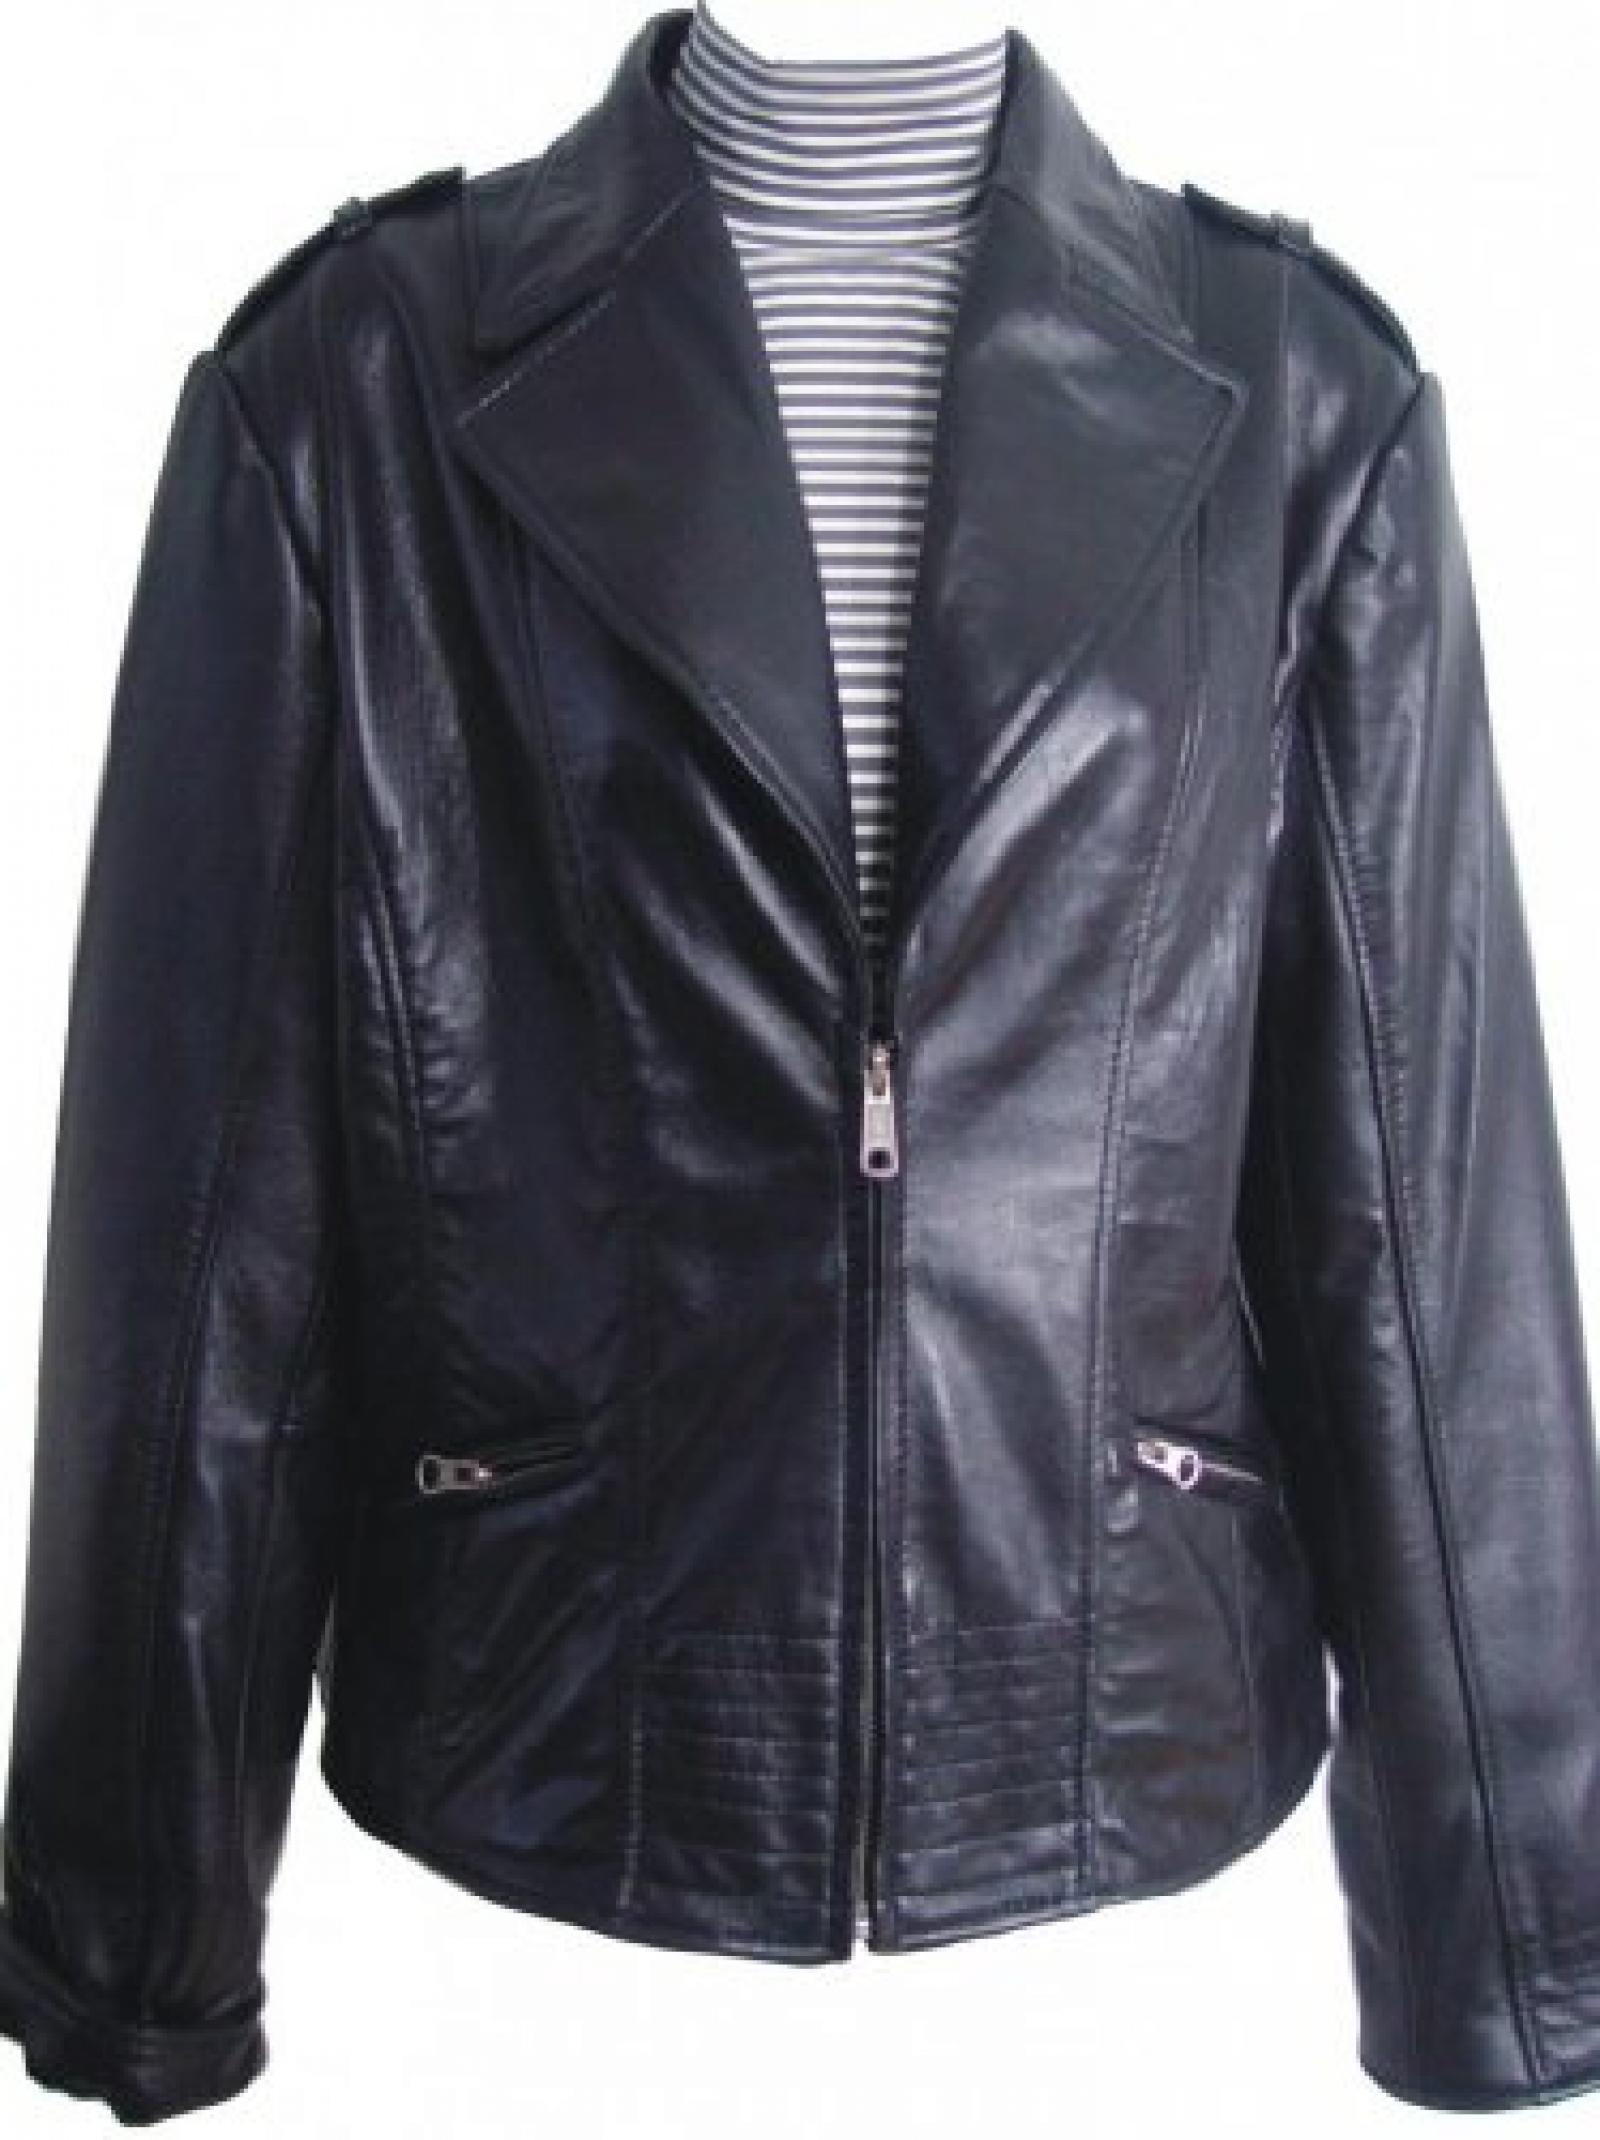 Paccilo FREE tailoring Women 4013 Lambskin Leather Jacket 